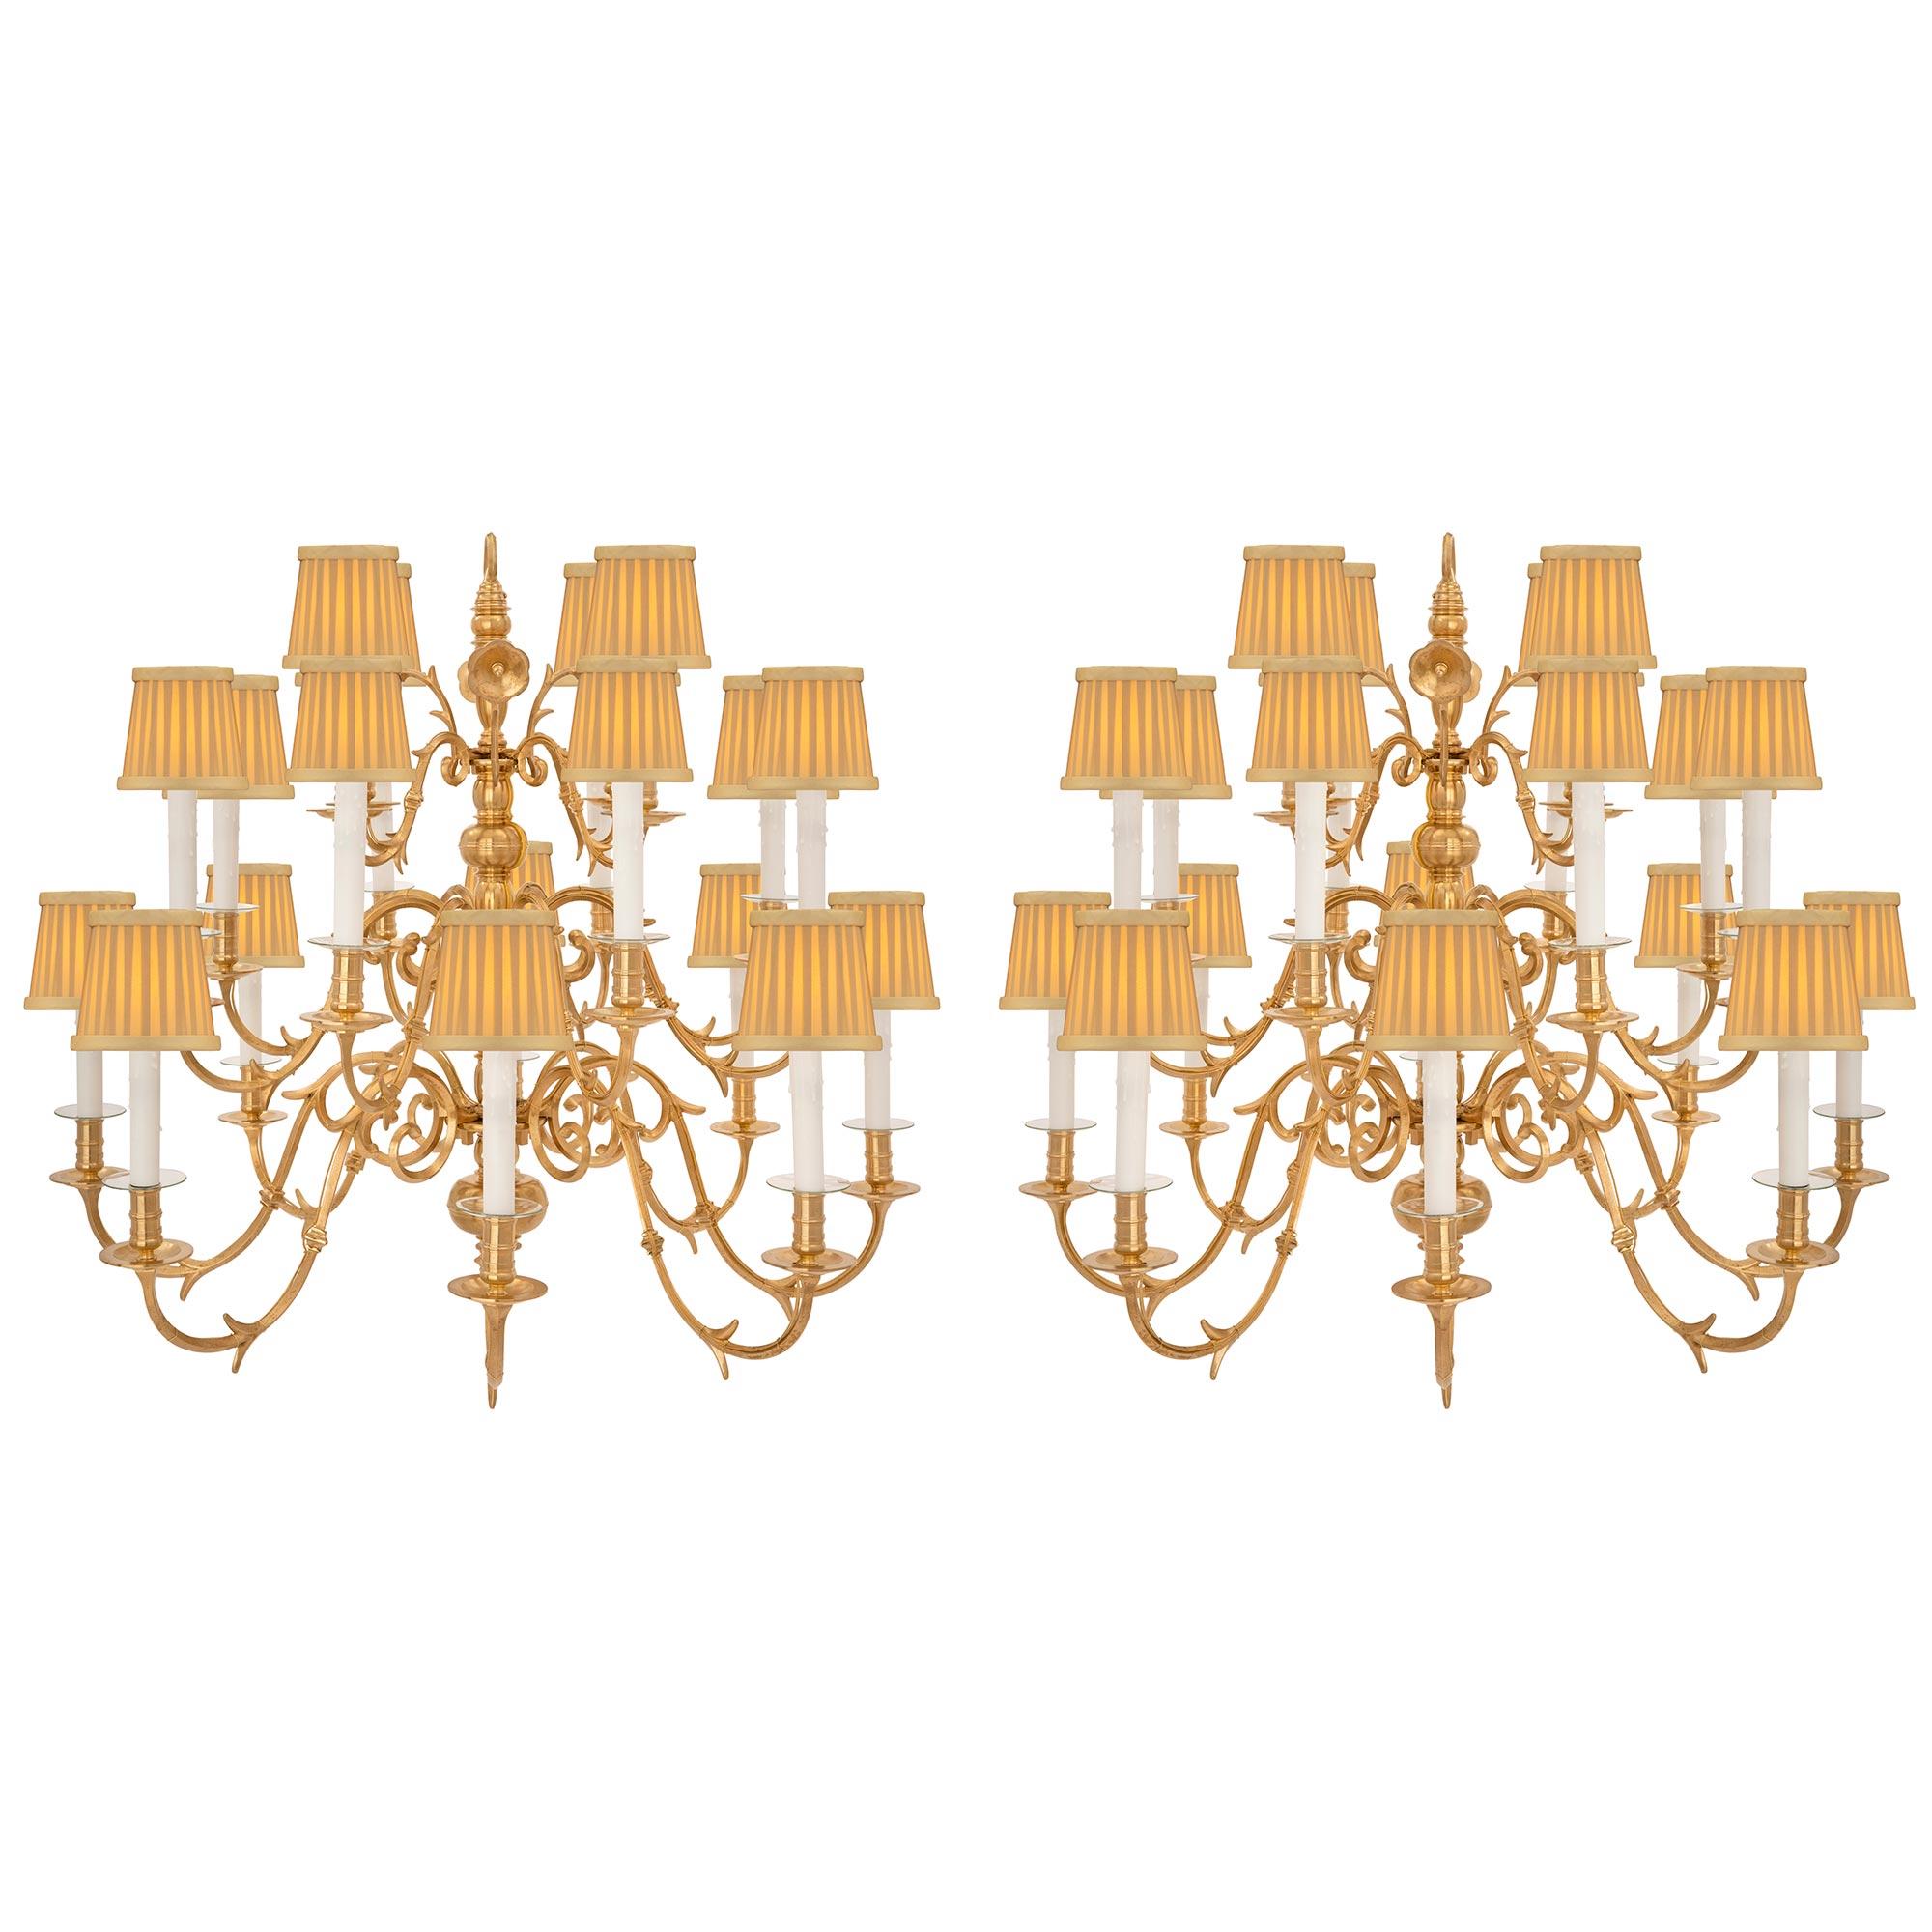 Pair of Dutch Early 19th Century Ormolu Chandeliers For Sale